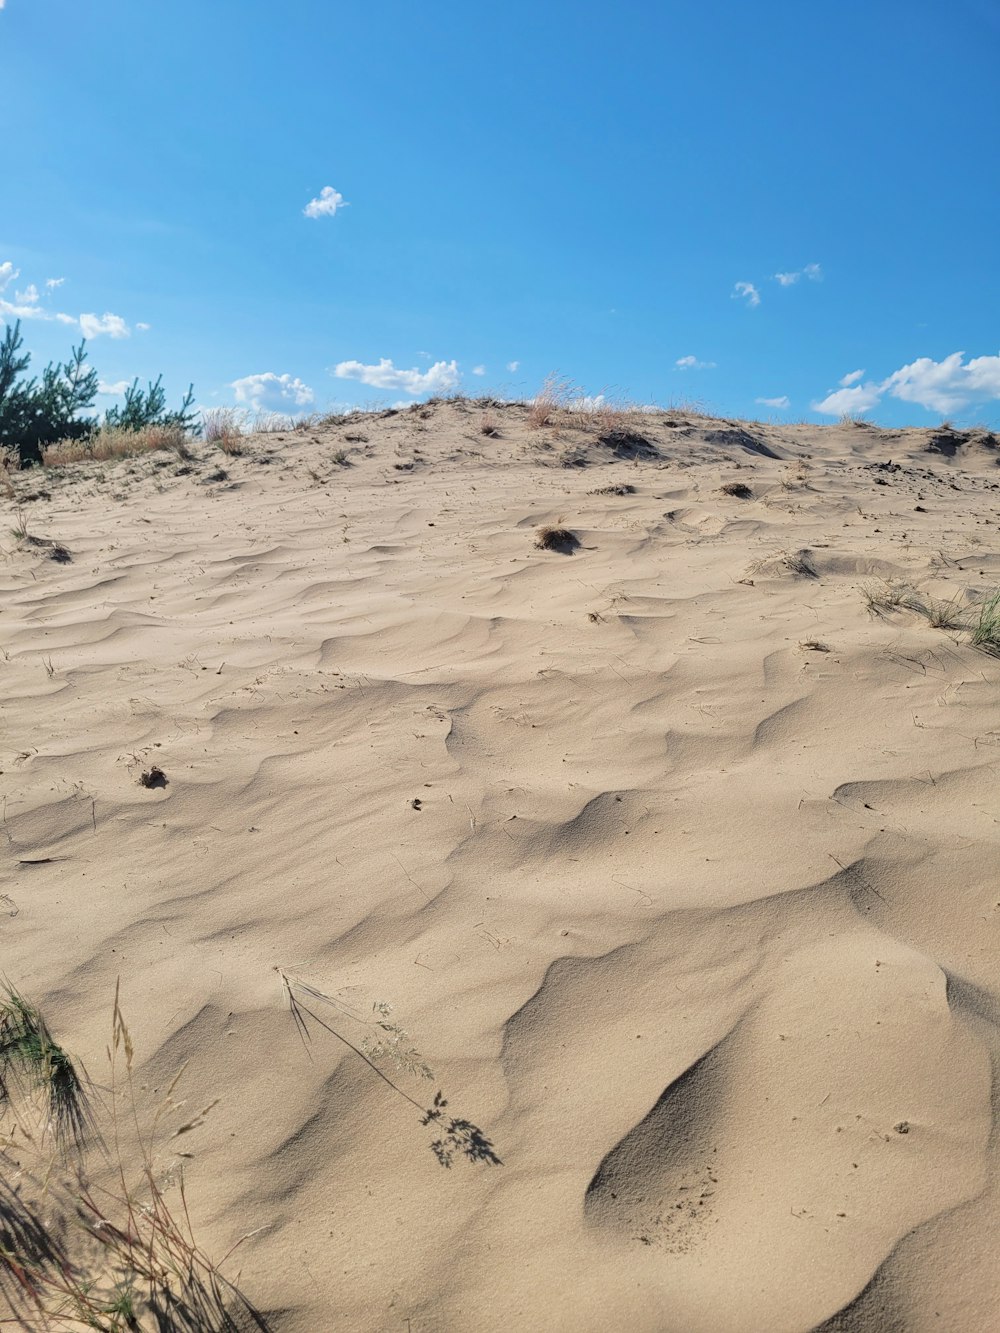 a view of a sandy area with a blue sky in the background